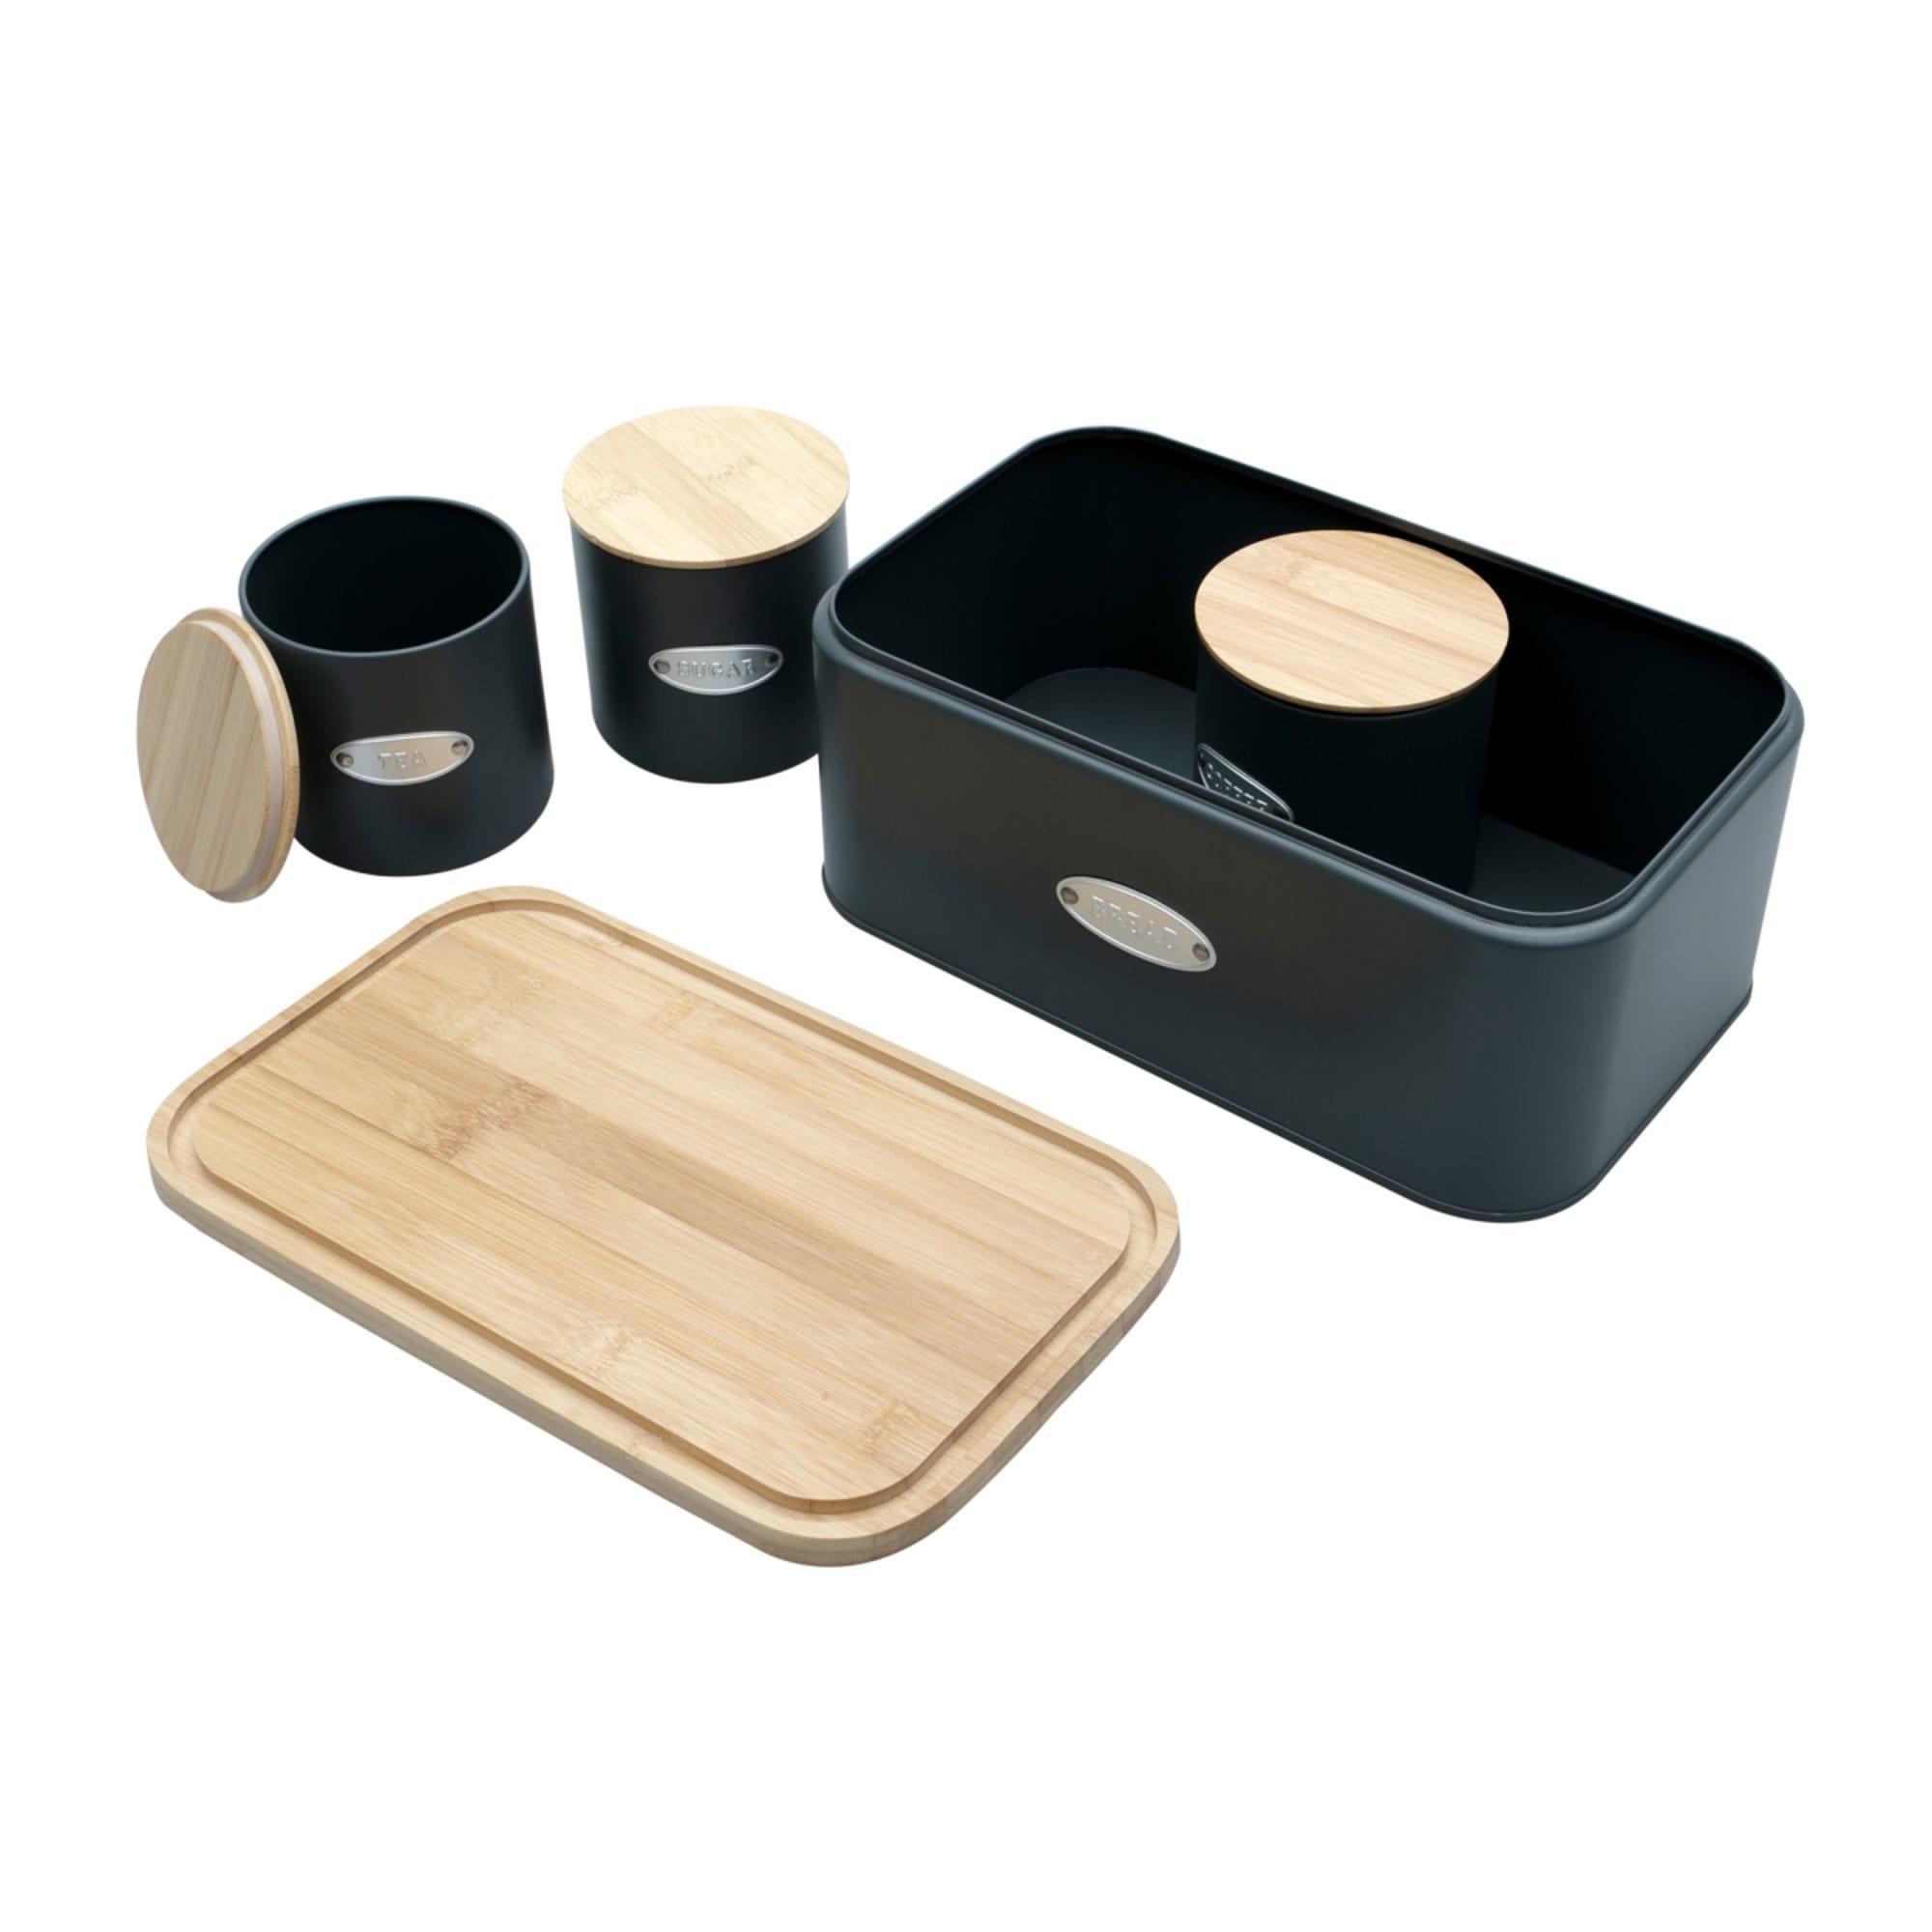 Sherwood Home Bread Box and Canister Set 4pc Image 7